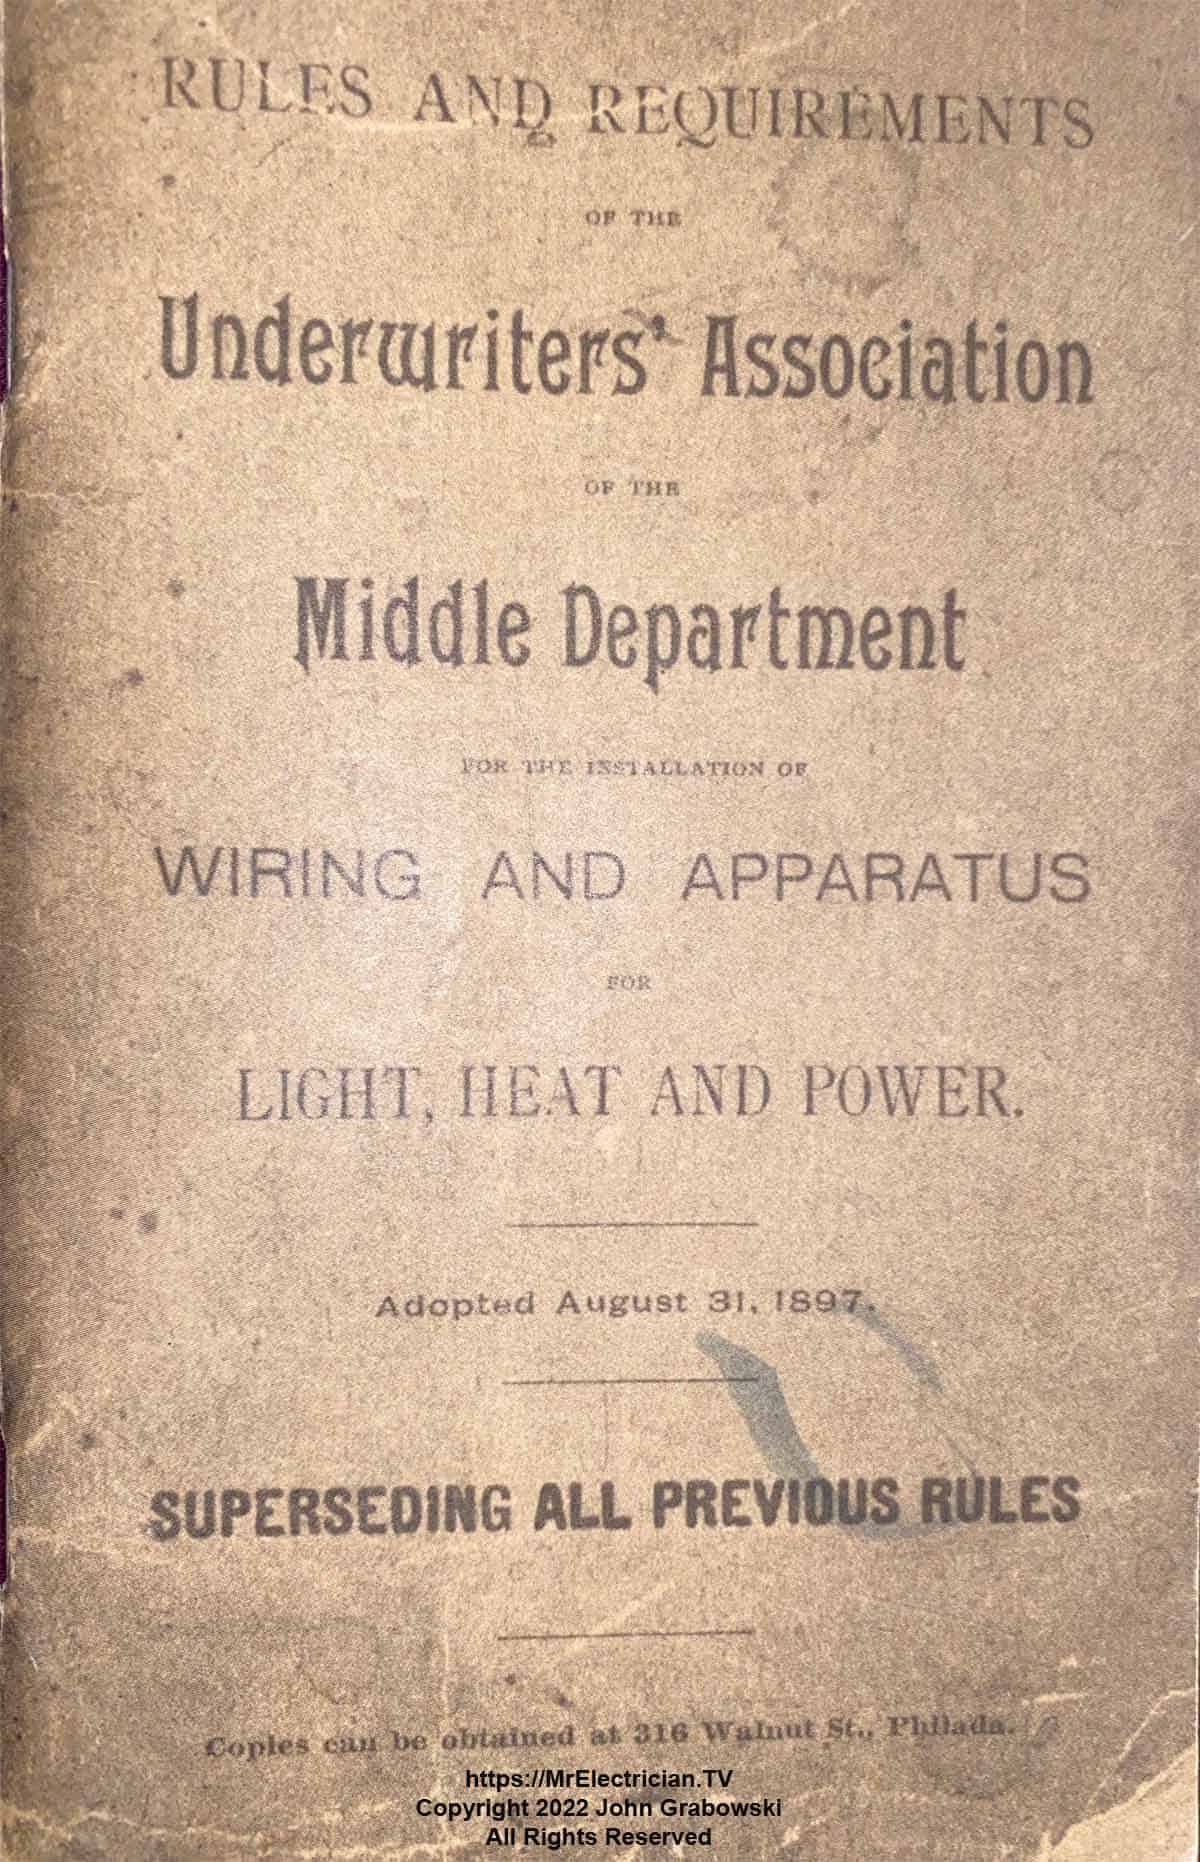 Cover of an old edition of an electrical code book published by Middle Department.   This was published prior to the formation of the National Electrical Code